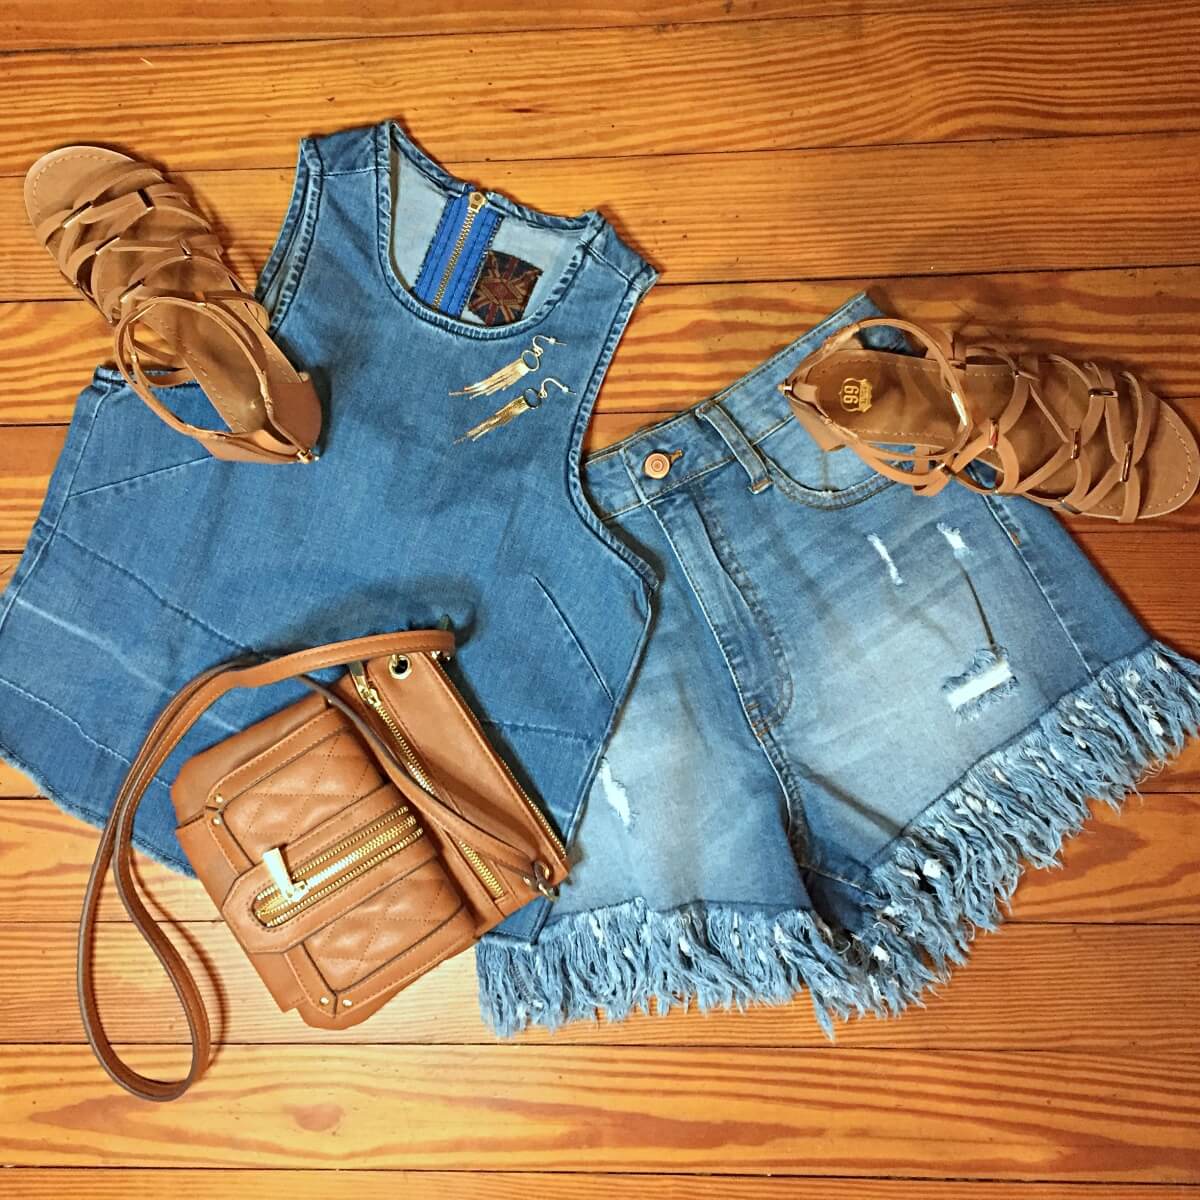 Pin on Denim Outfit Ideas